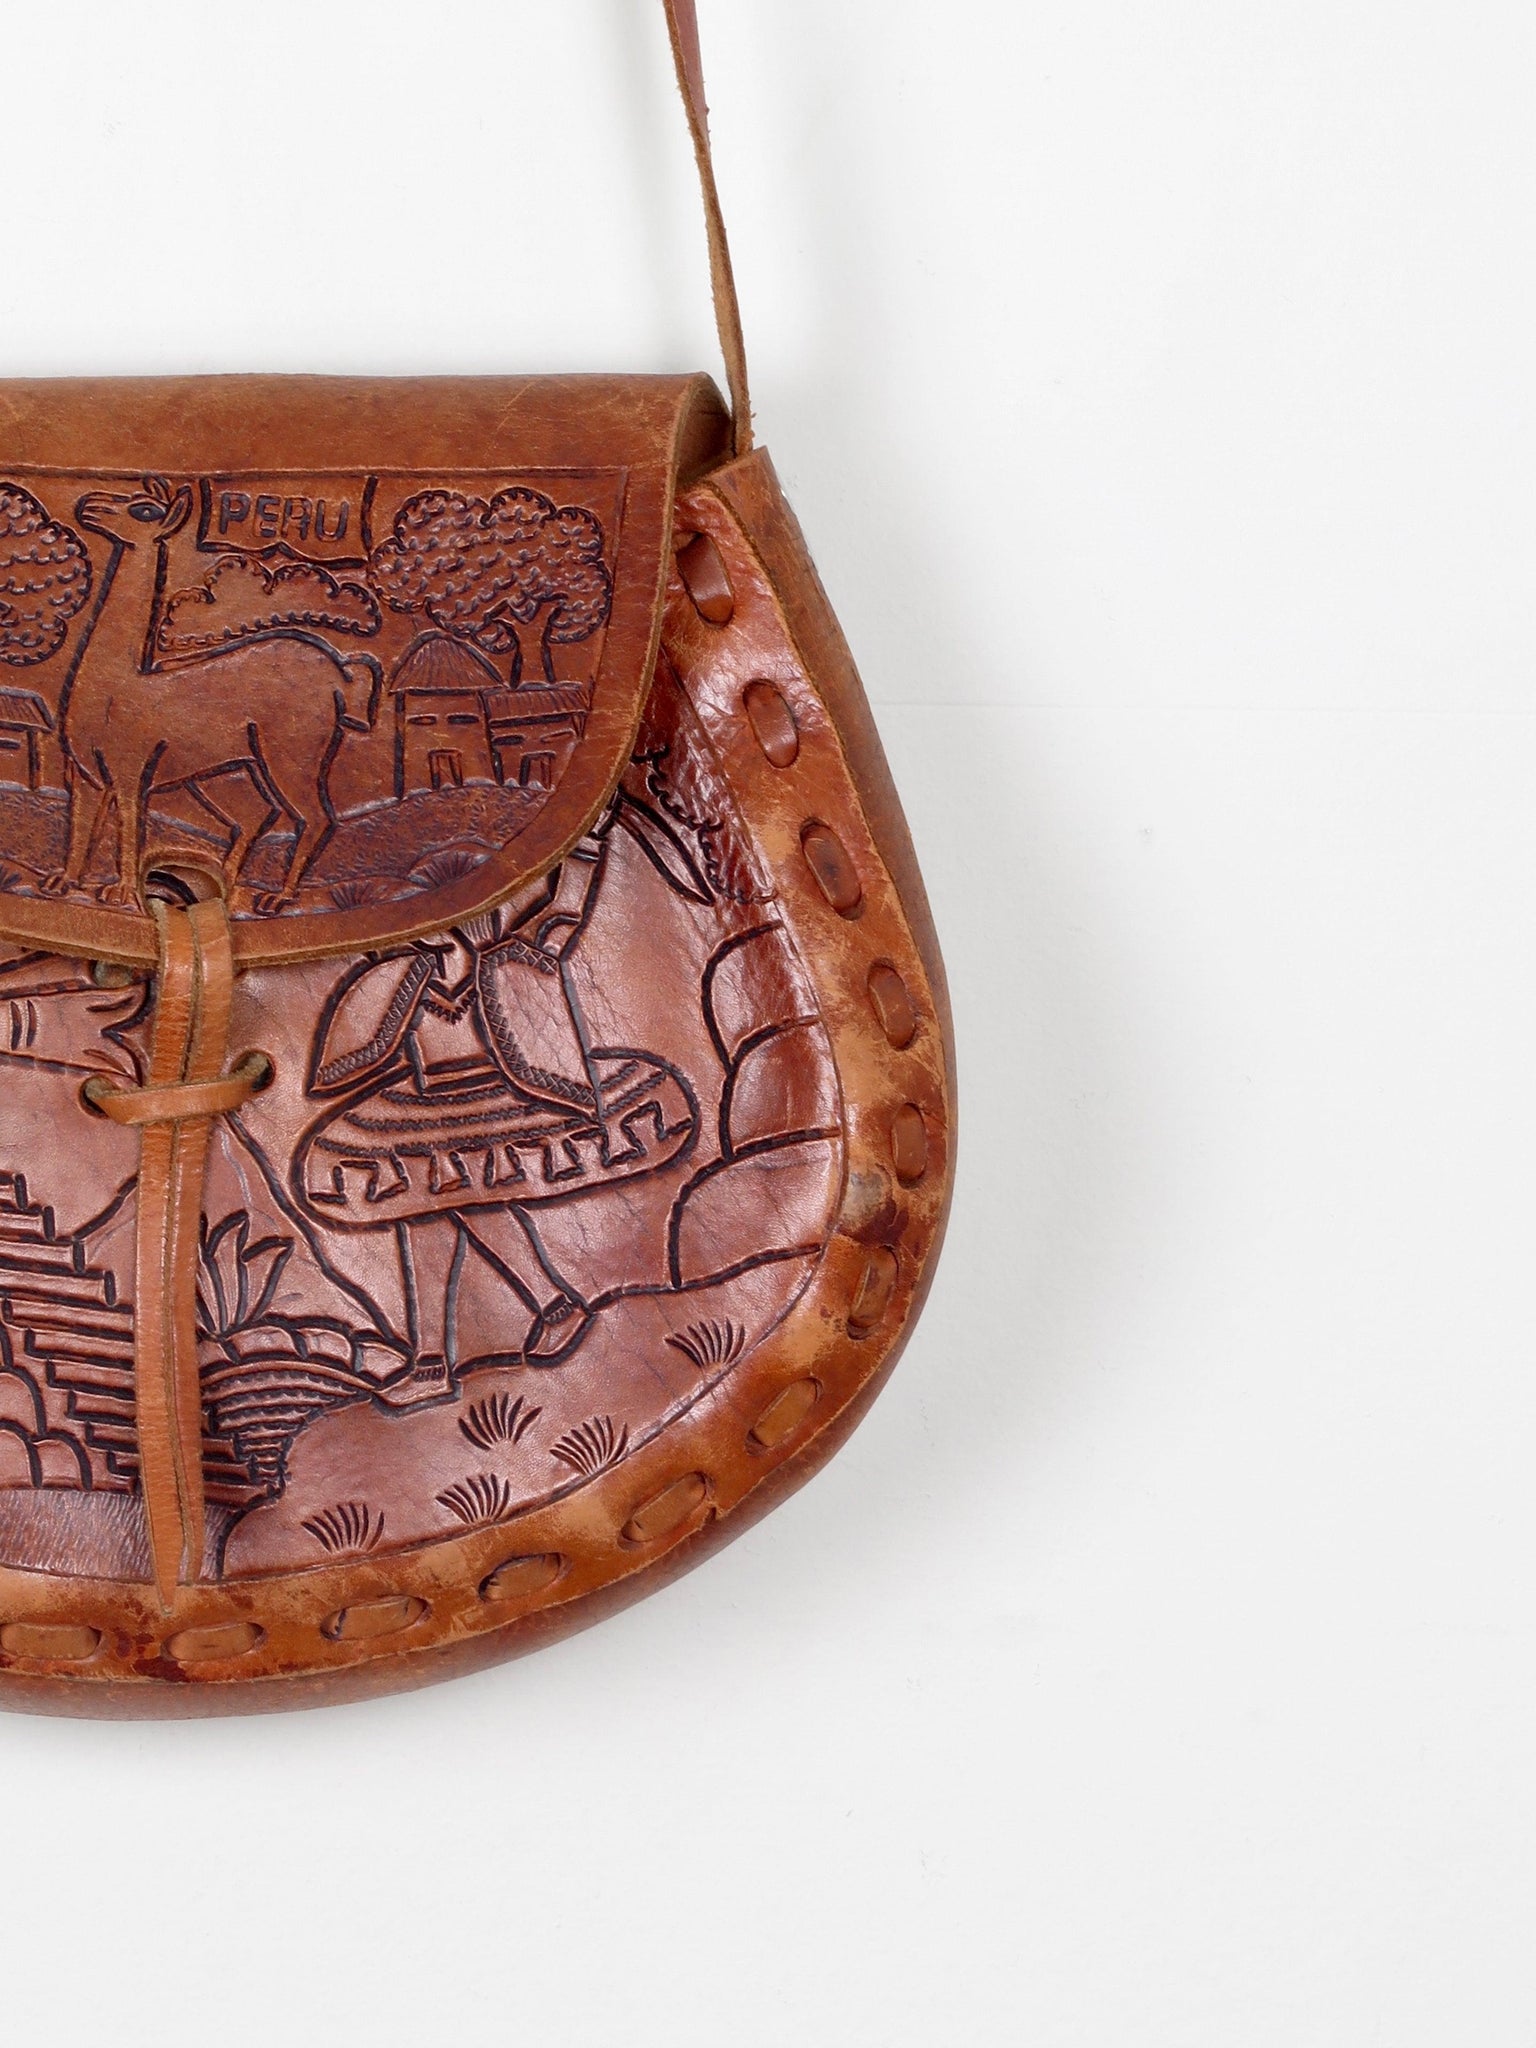 Tan Leather Vintage Peruvian Tooled Bag - The Harlequin